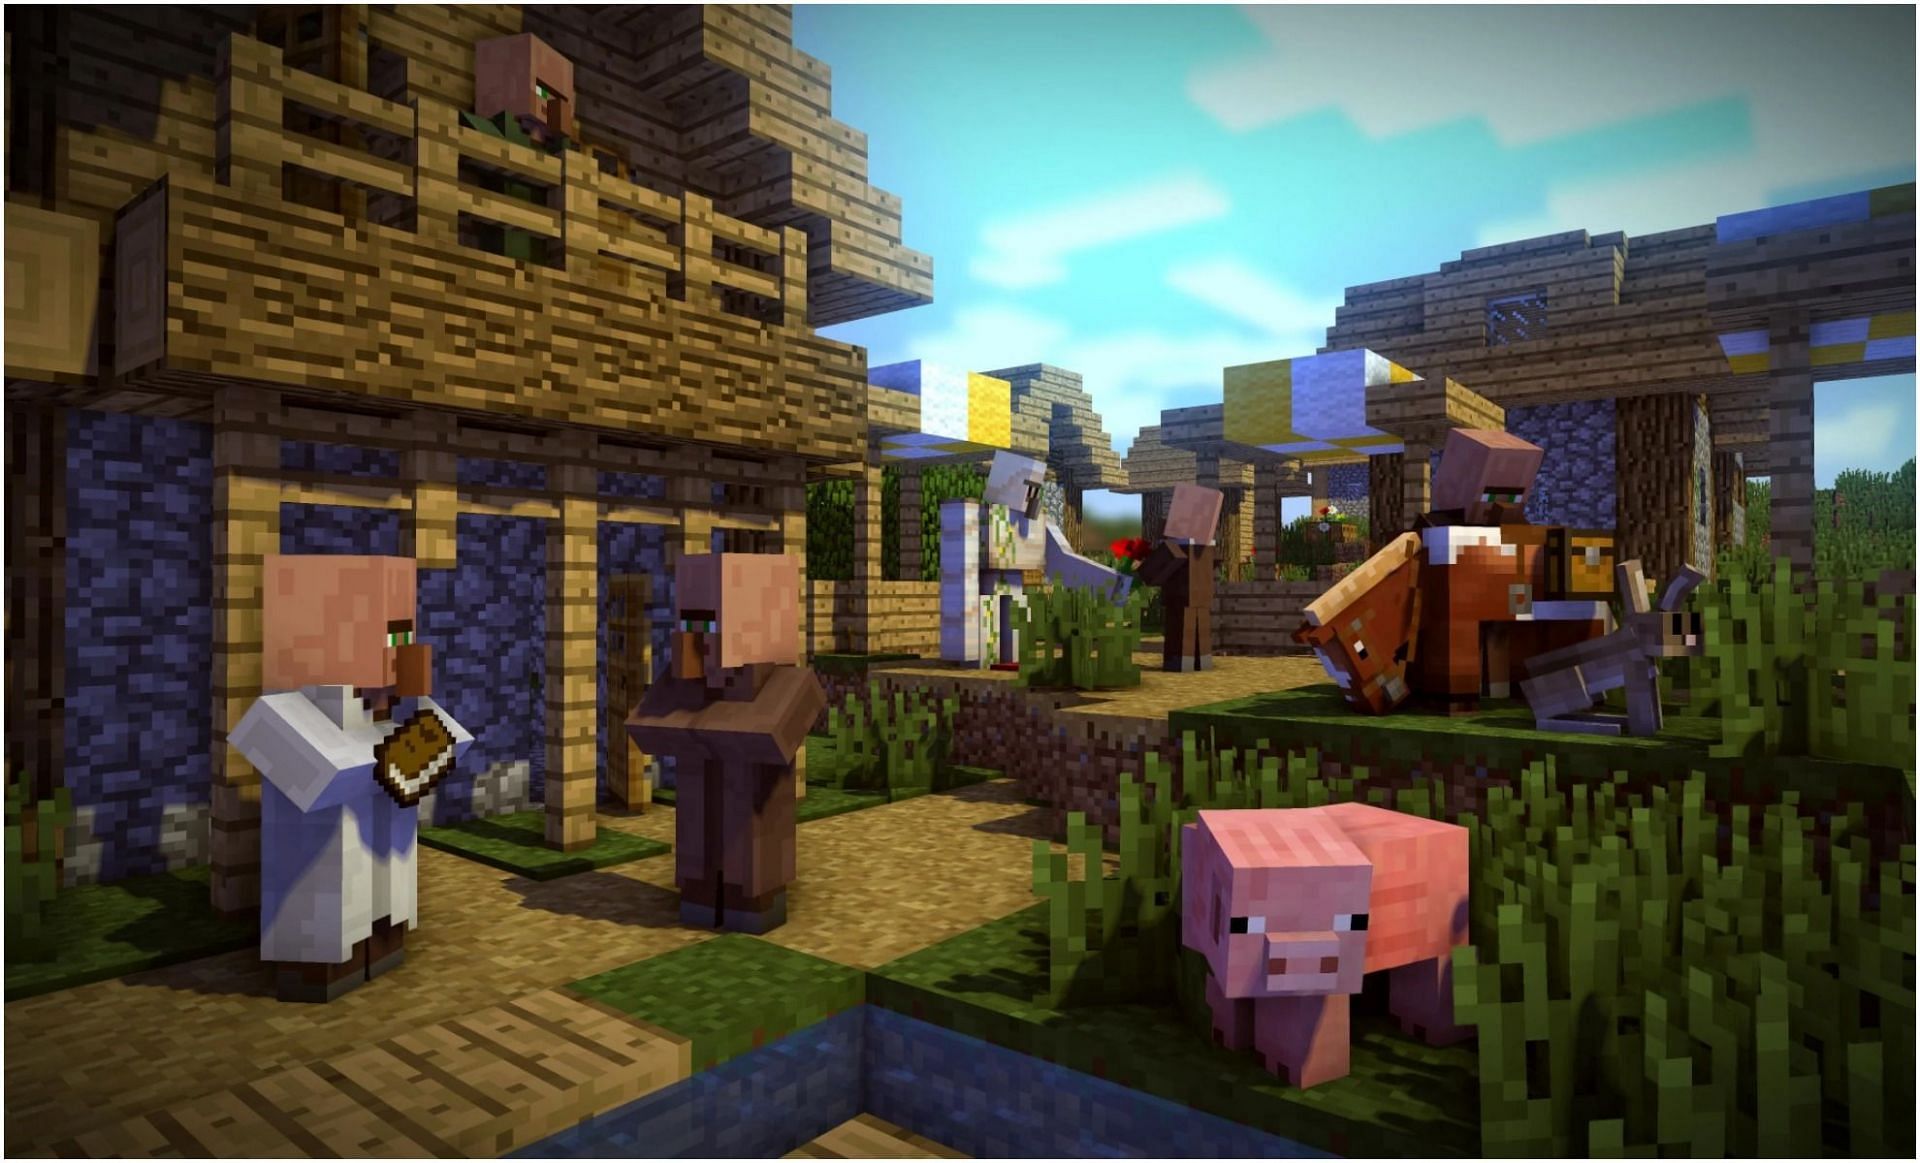 Villagers going about their day (Image via Minecraft)